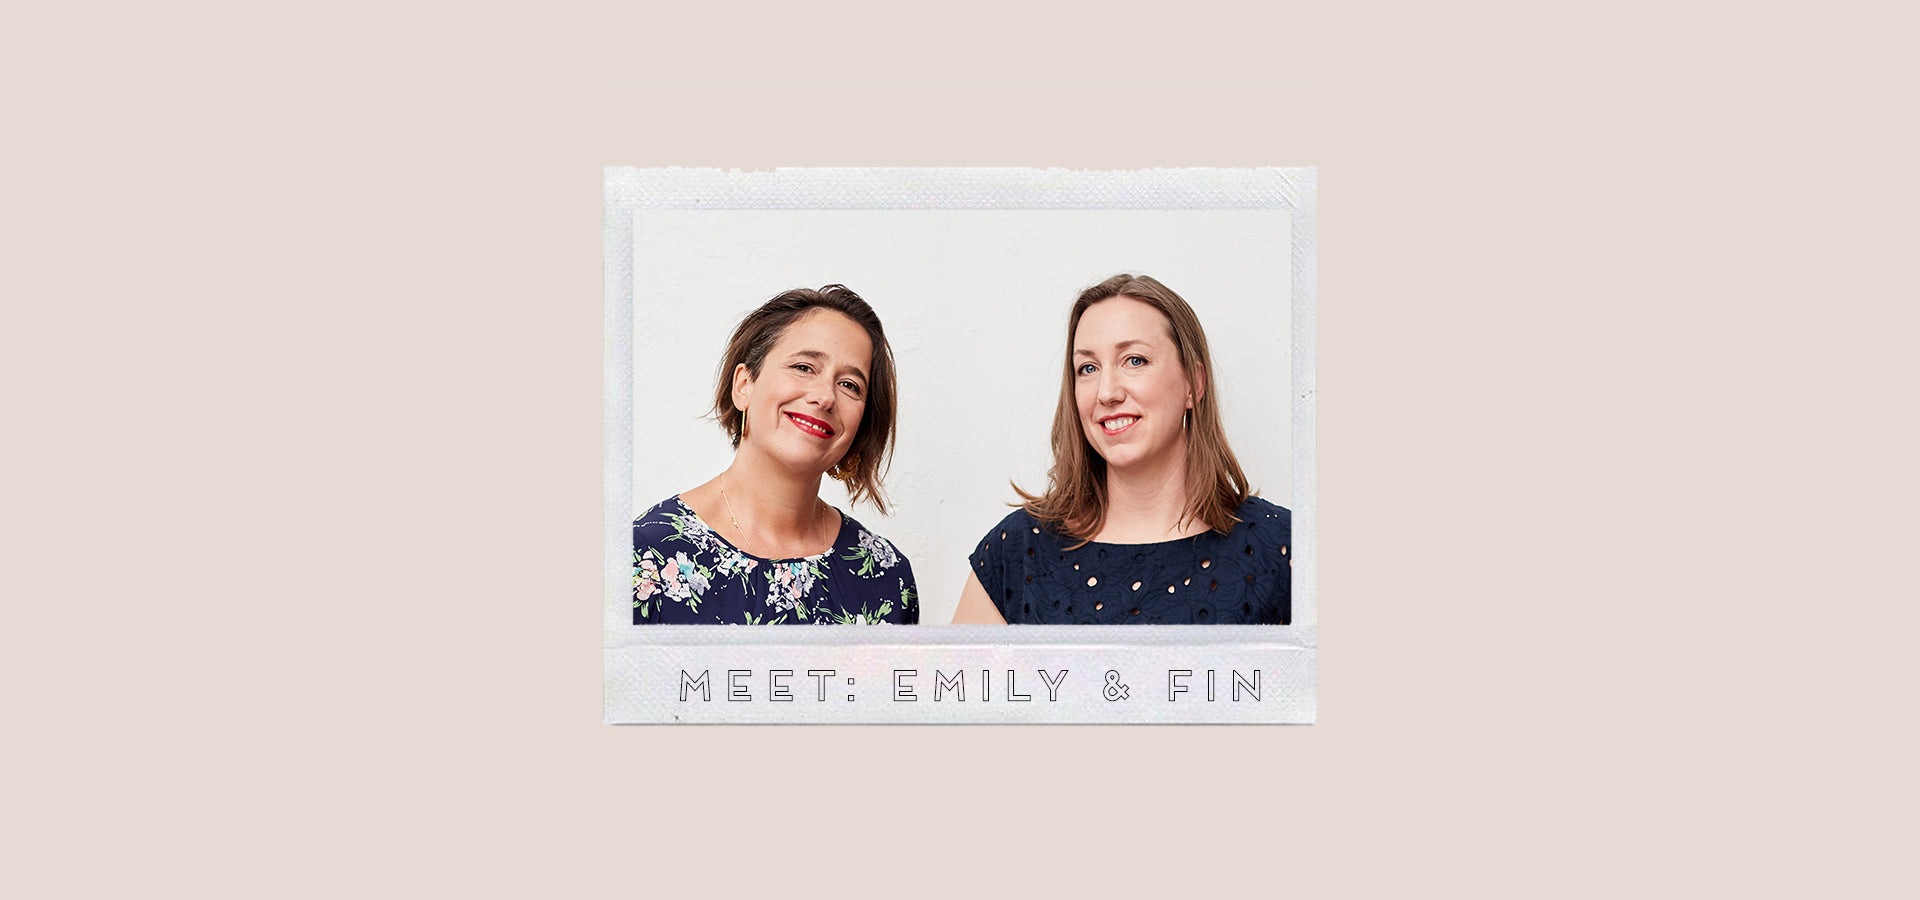 15 Questions for Emily and Fin